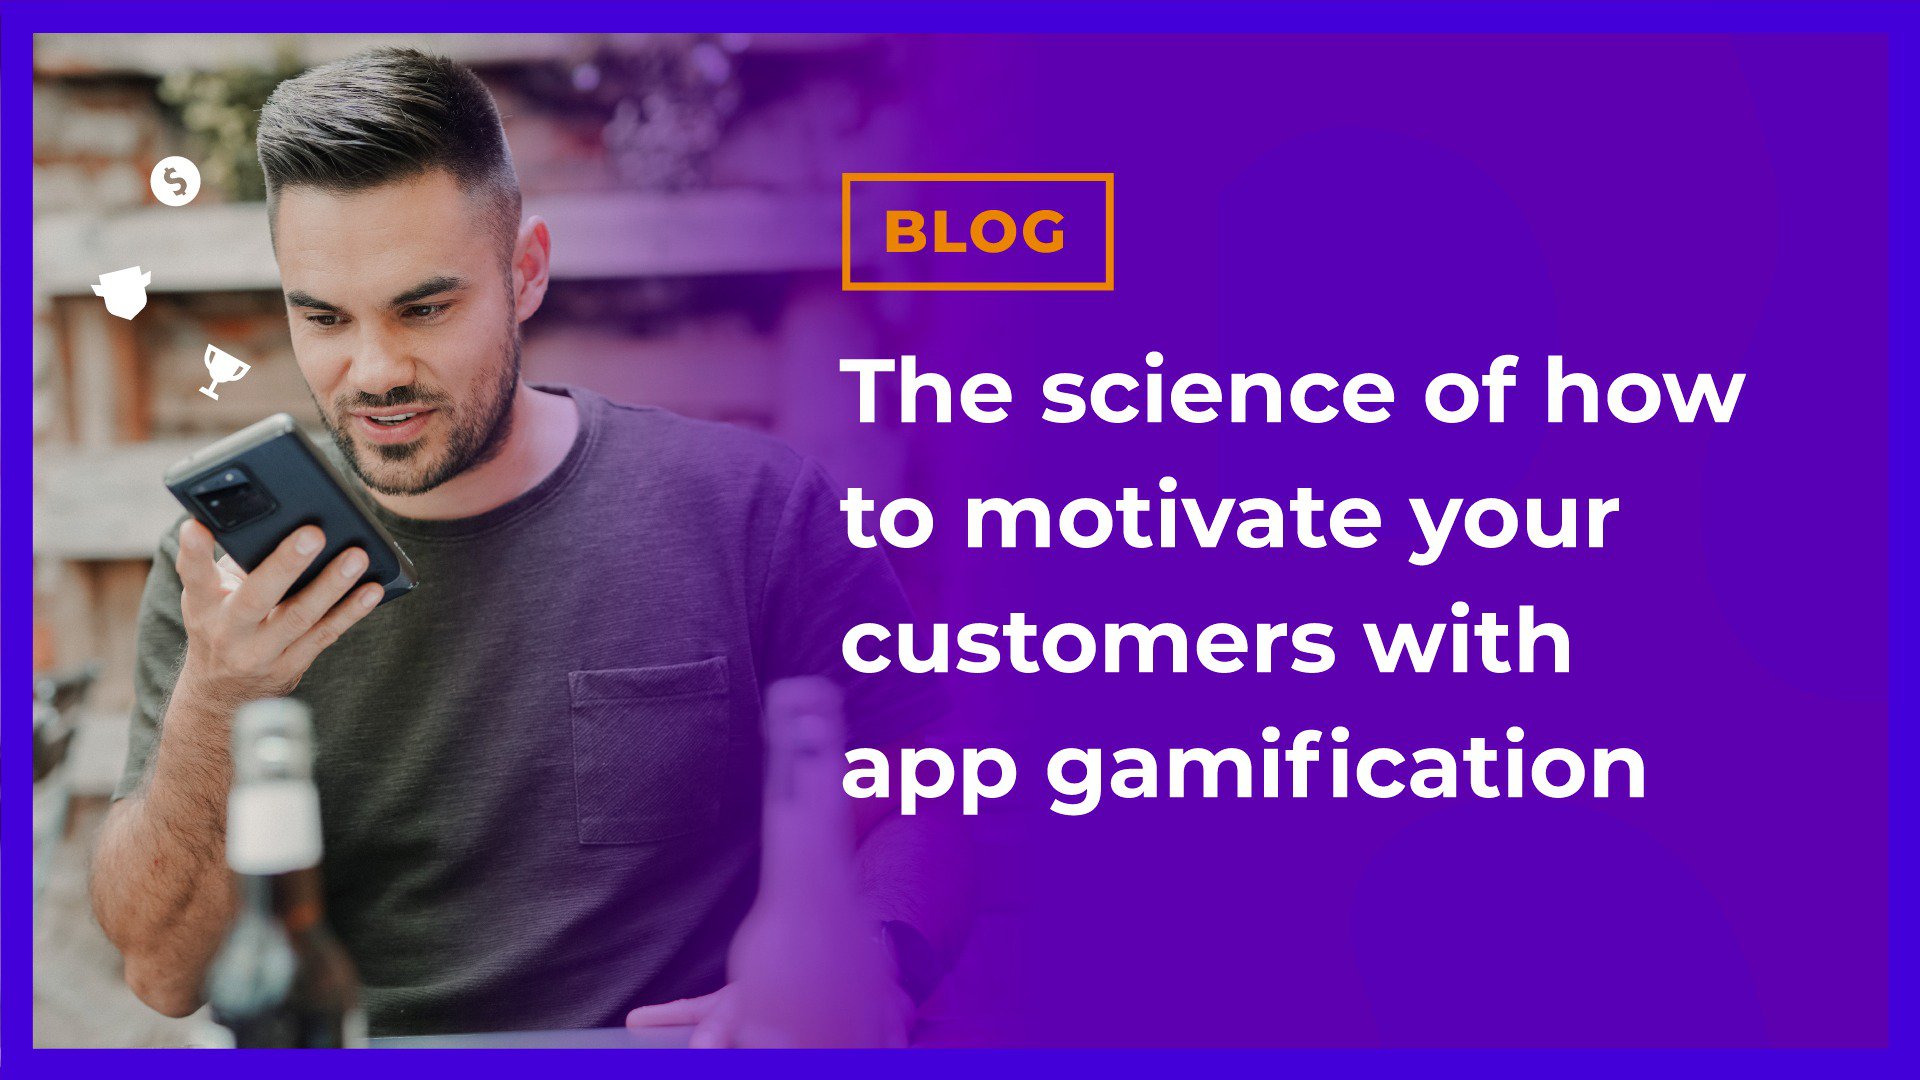 The science of how to motivate your customers with app gamification